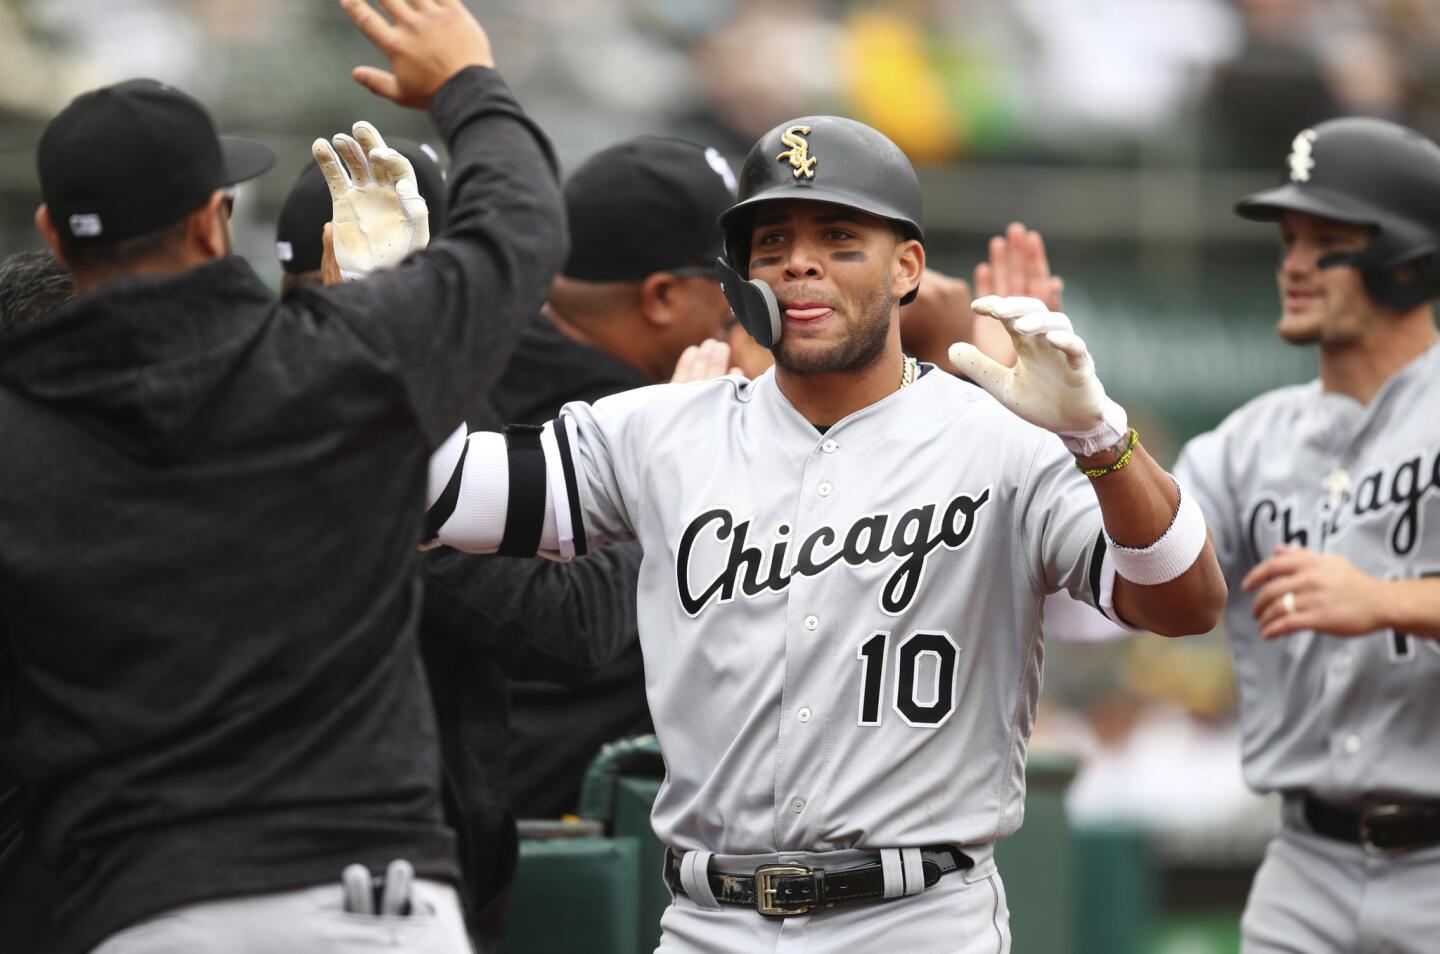 White Sox second baseman Yoan Moncada (10) celebrates after hitting a grand slam off Athletics pitcher Andrew Triggs during the second inning Wednesday, April 18, 2018, in Oakland, Calif.